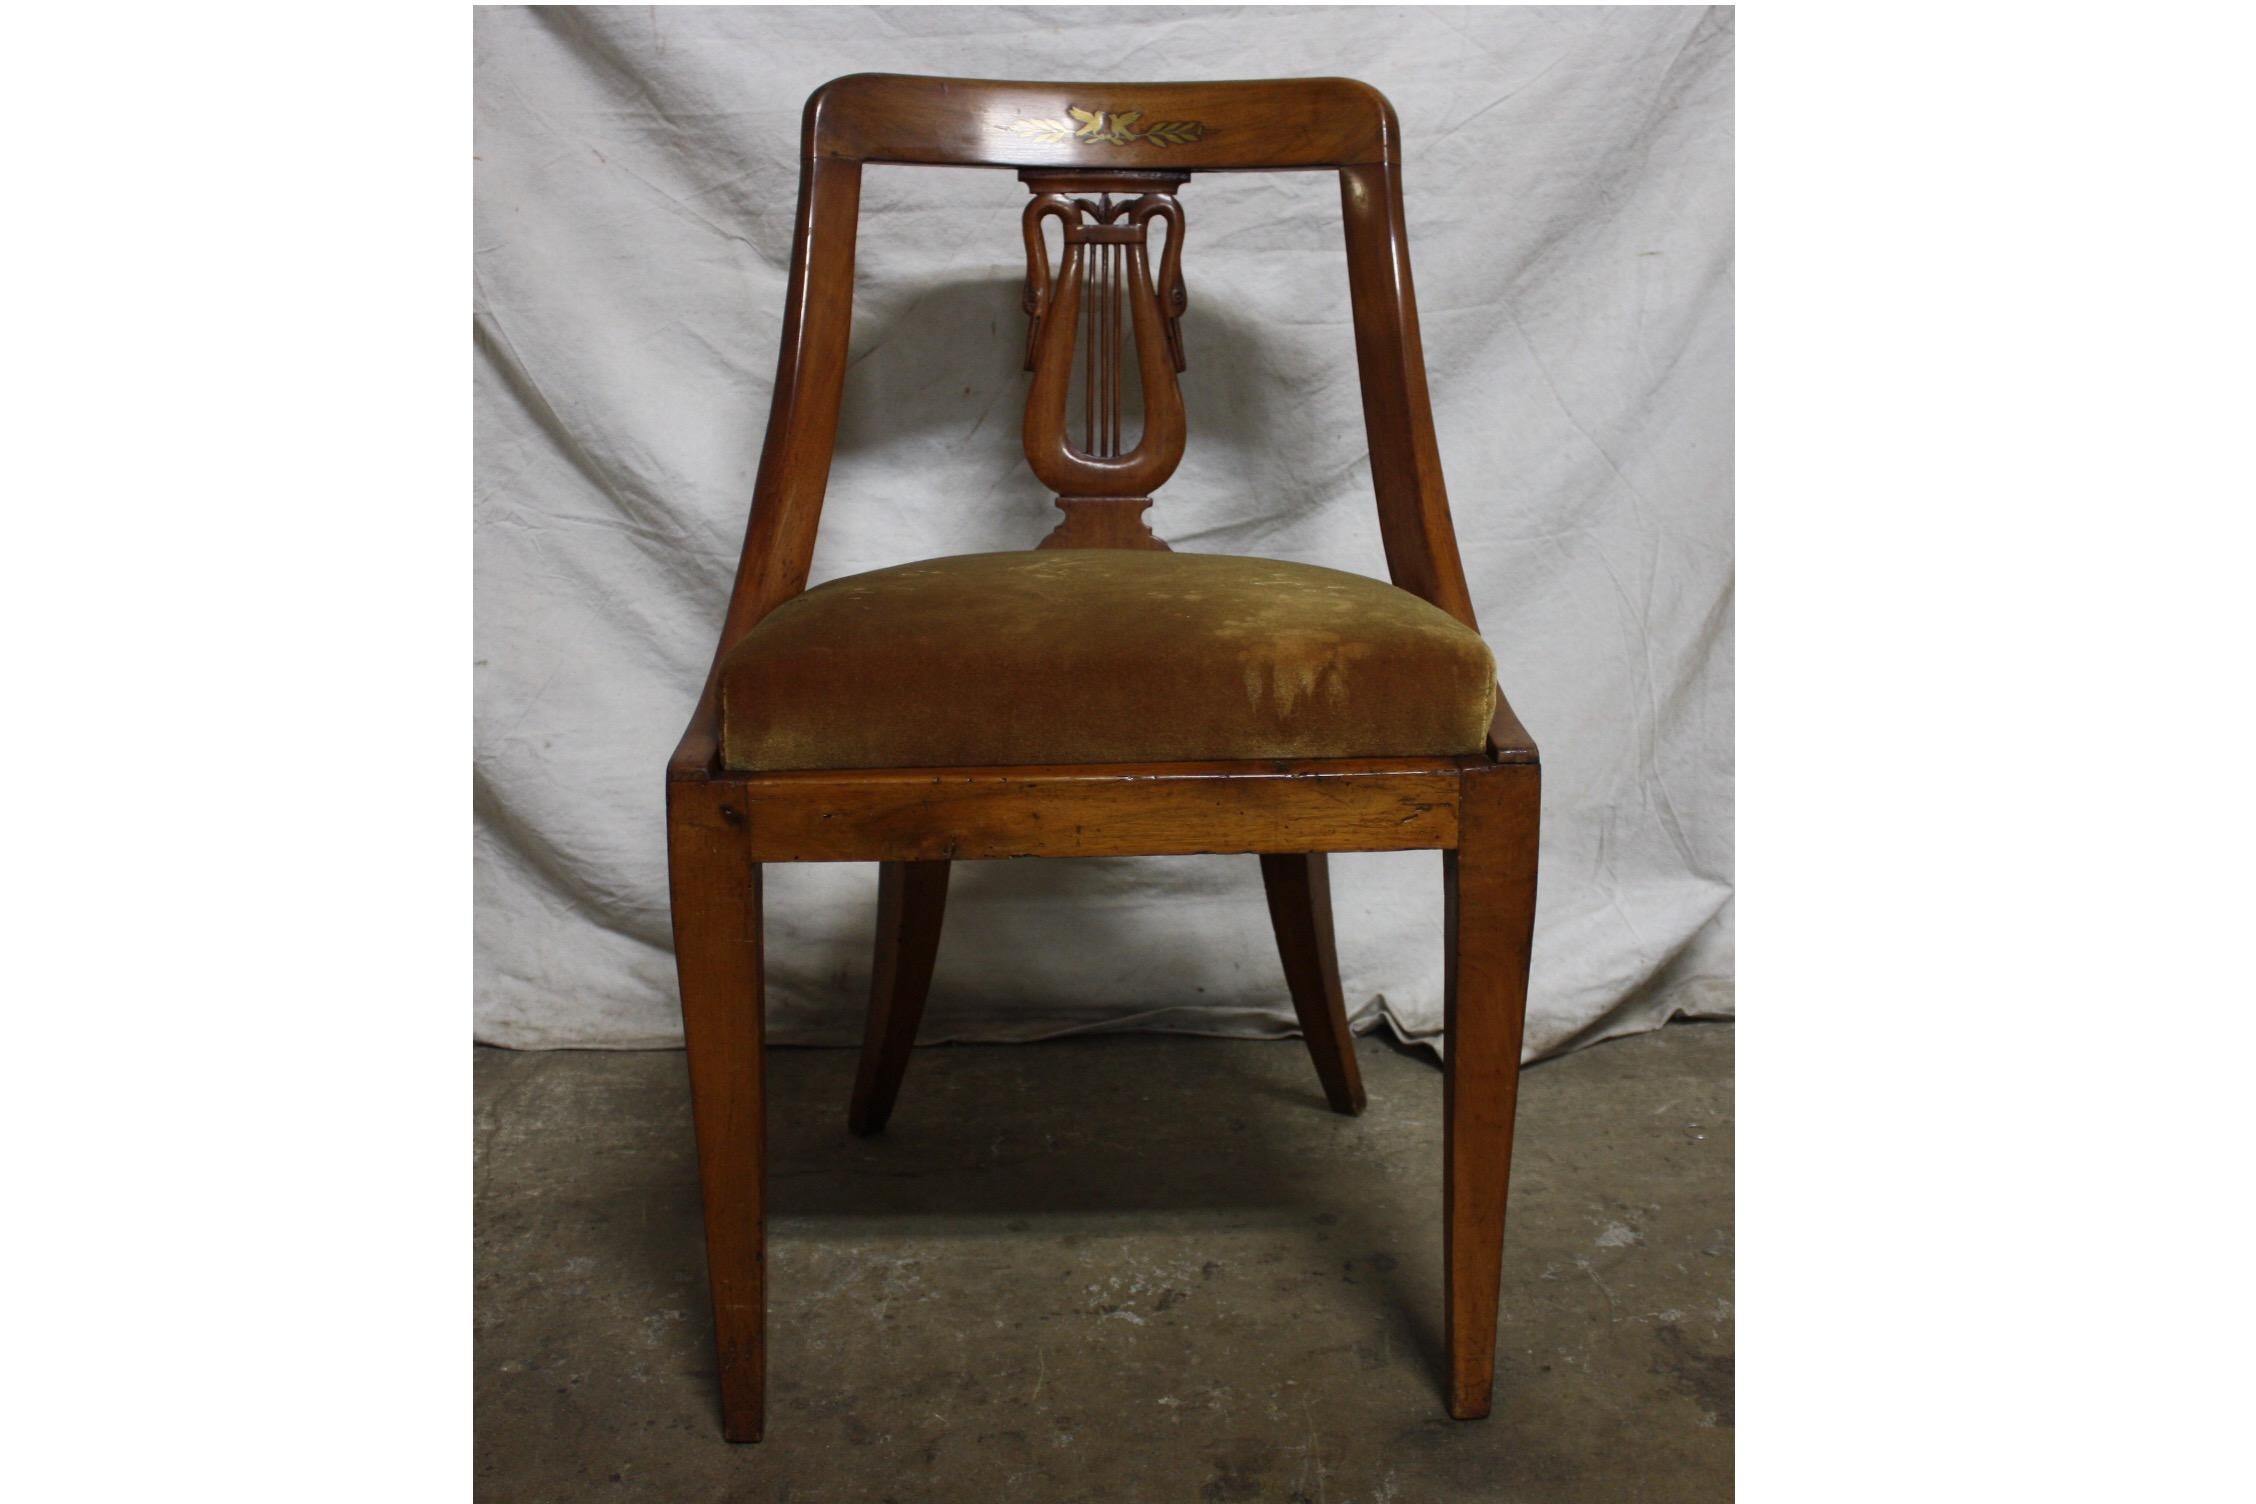 Early 19th century chair, French Restauration Period.